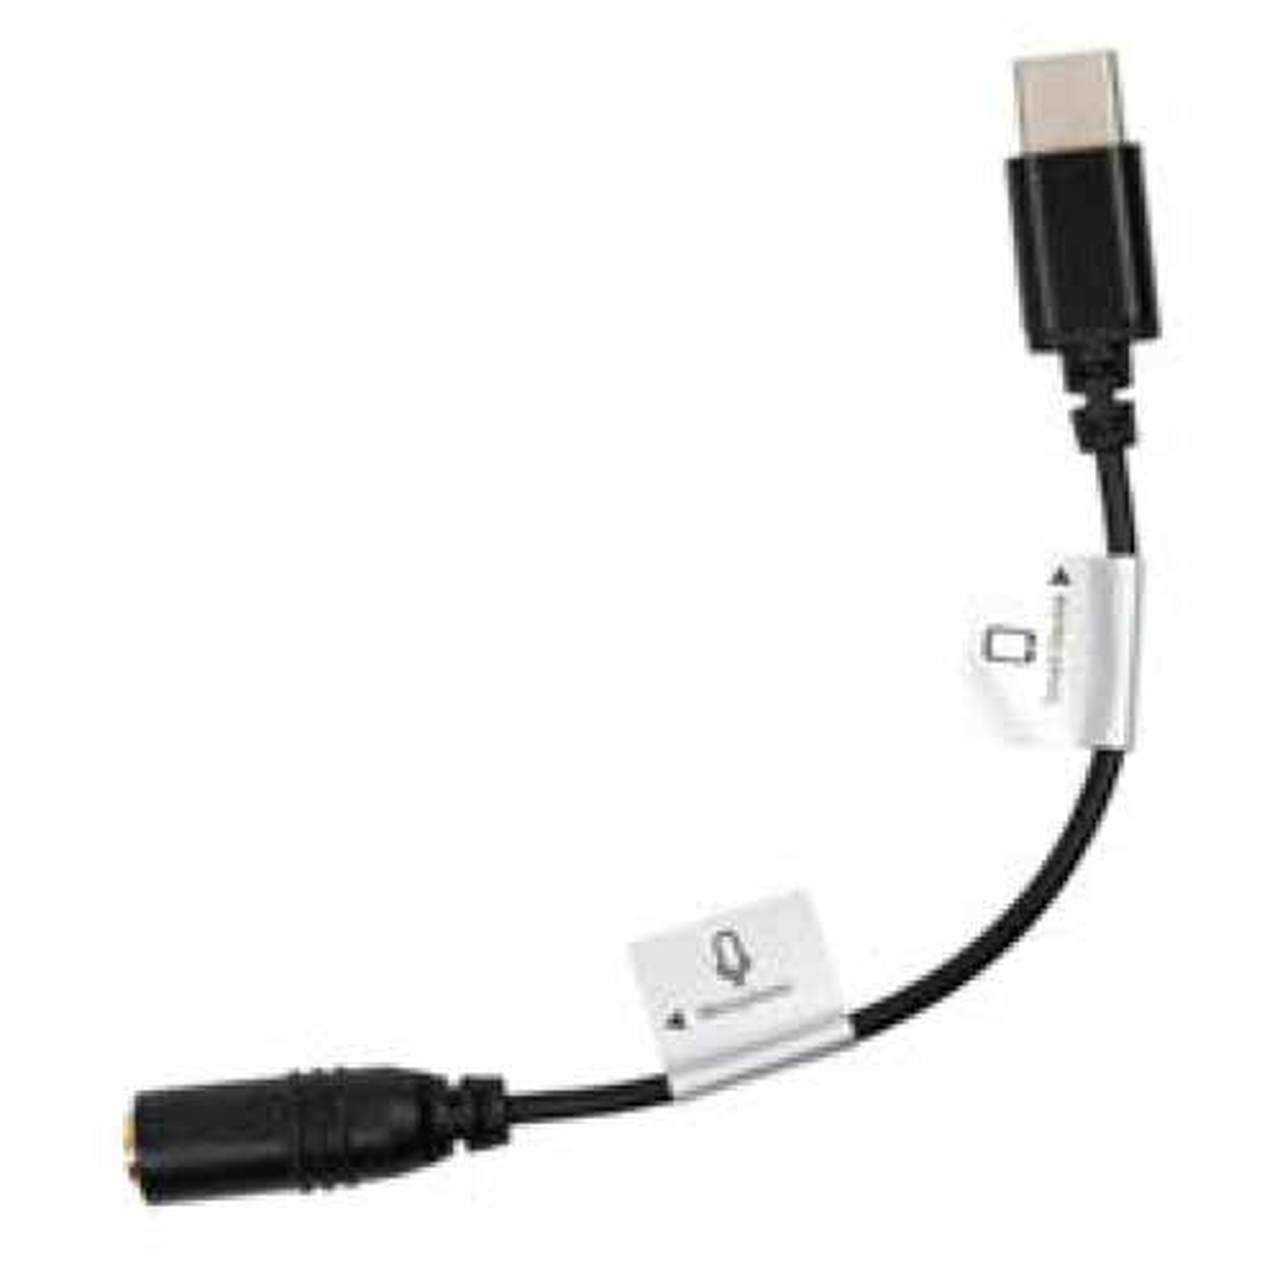 Promaster Audio Cable USB-C male straight - 3.5mm TRS female straight - 3" straight adapter